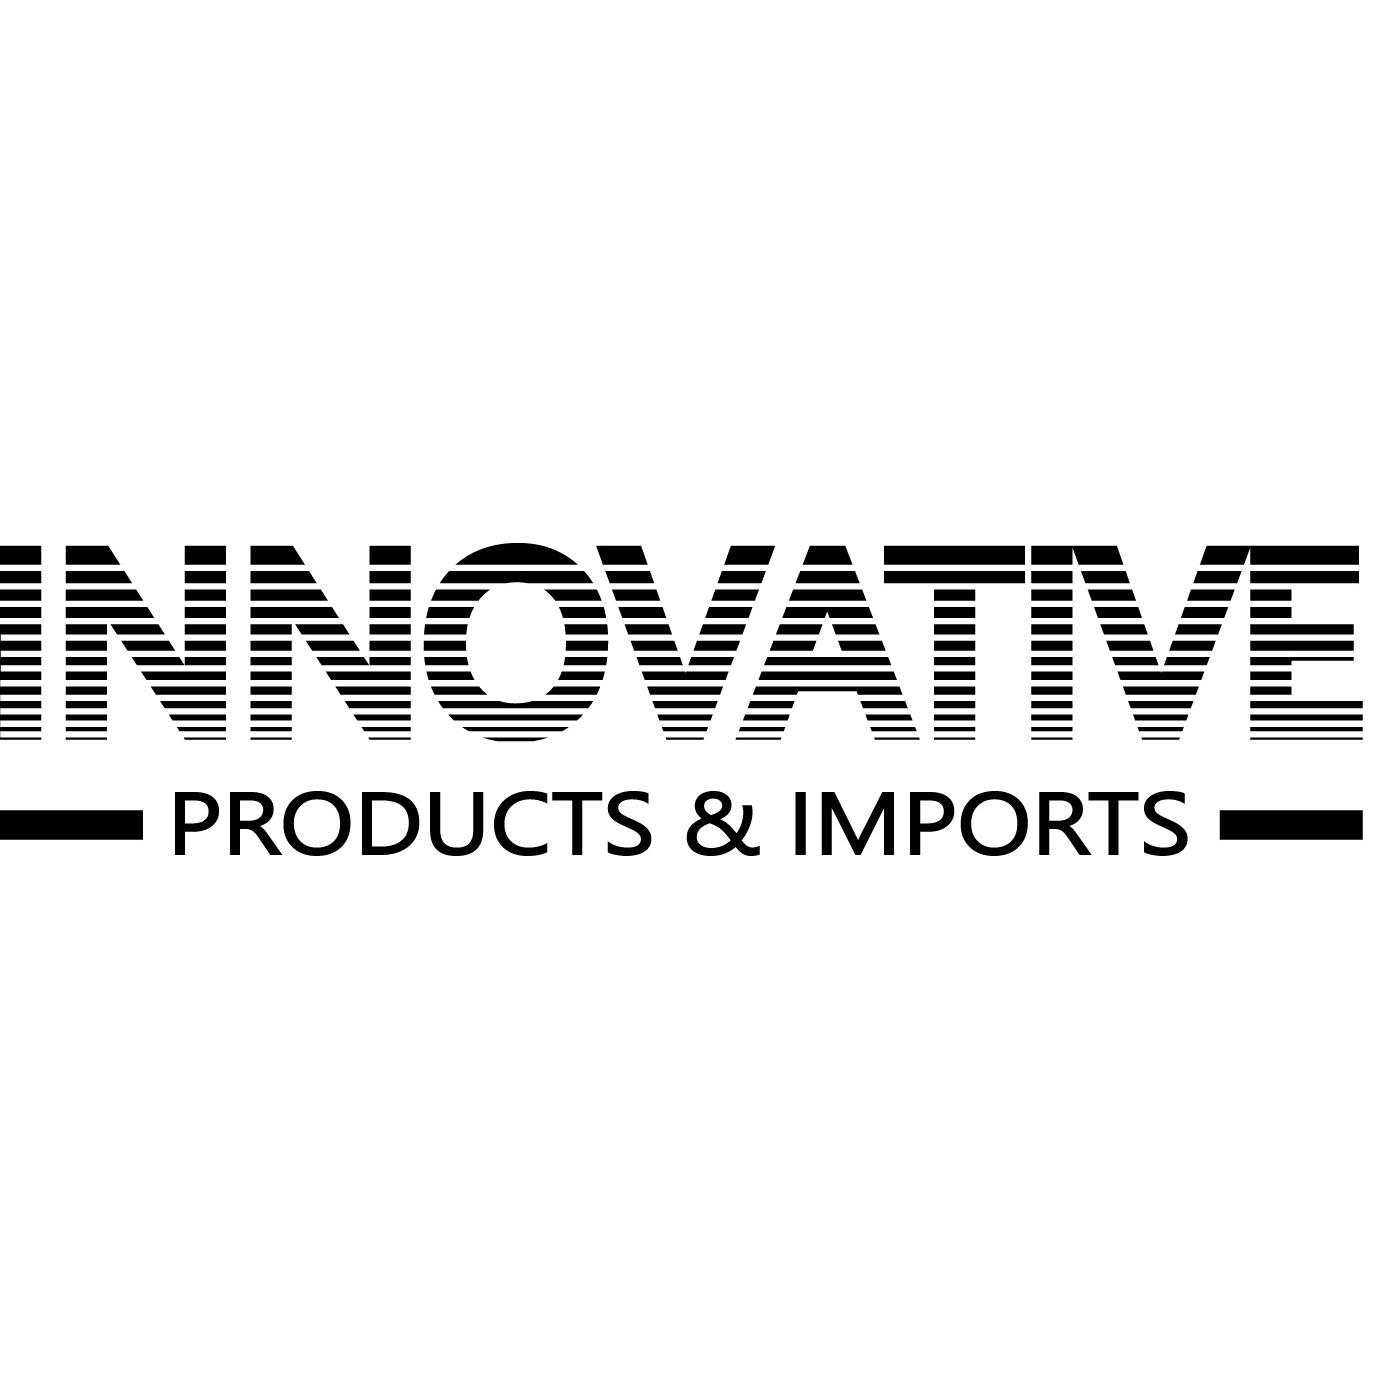 Innovative Products & Imports, Inc